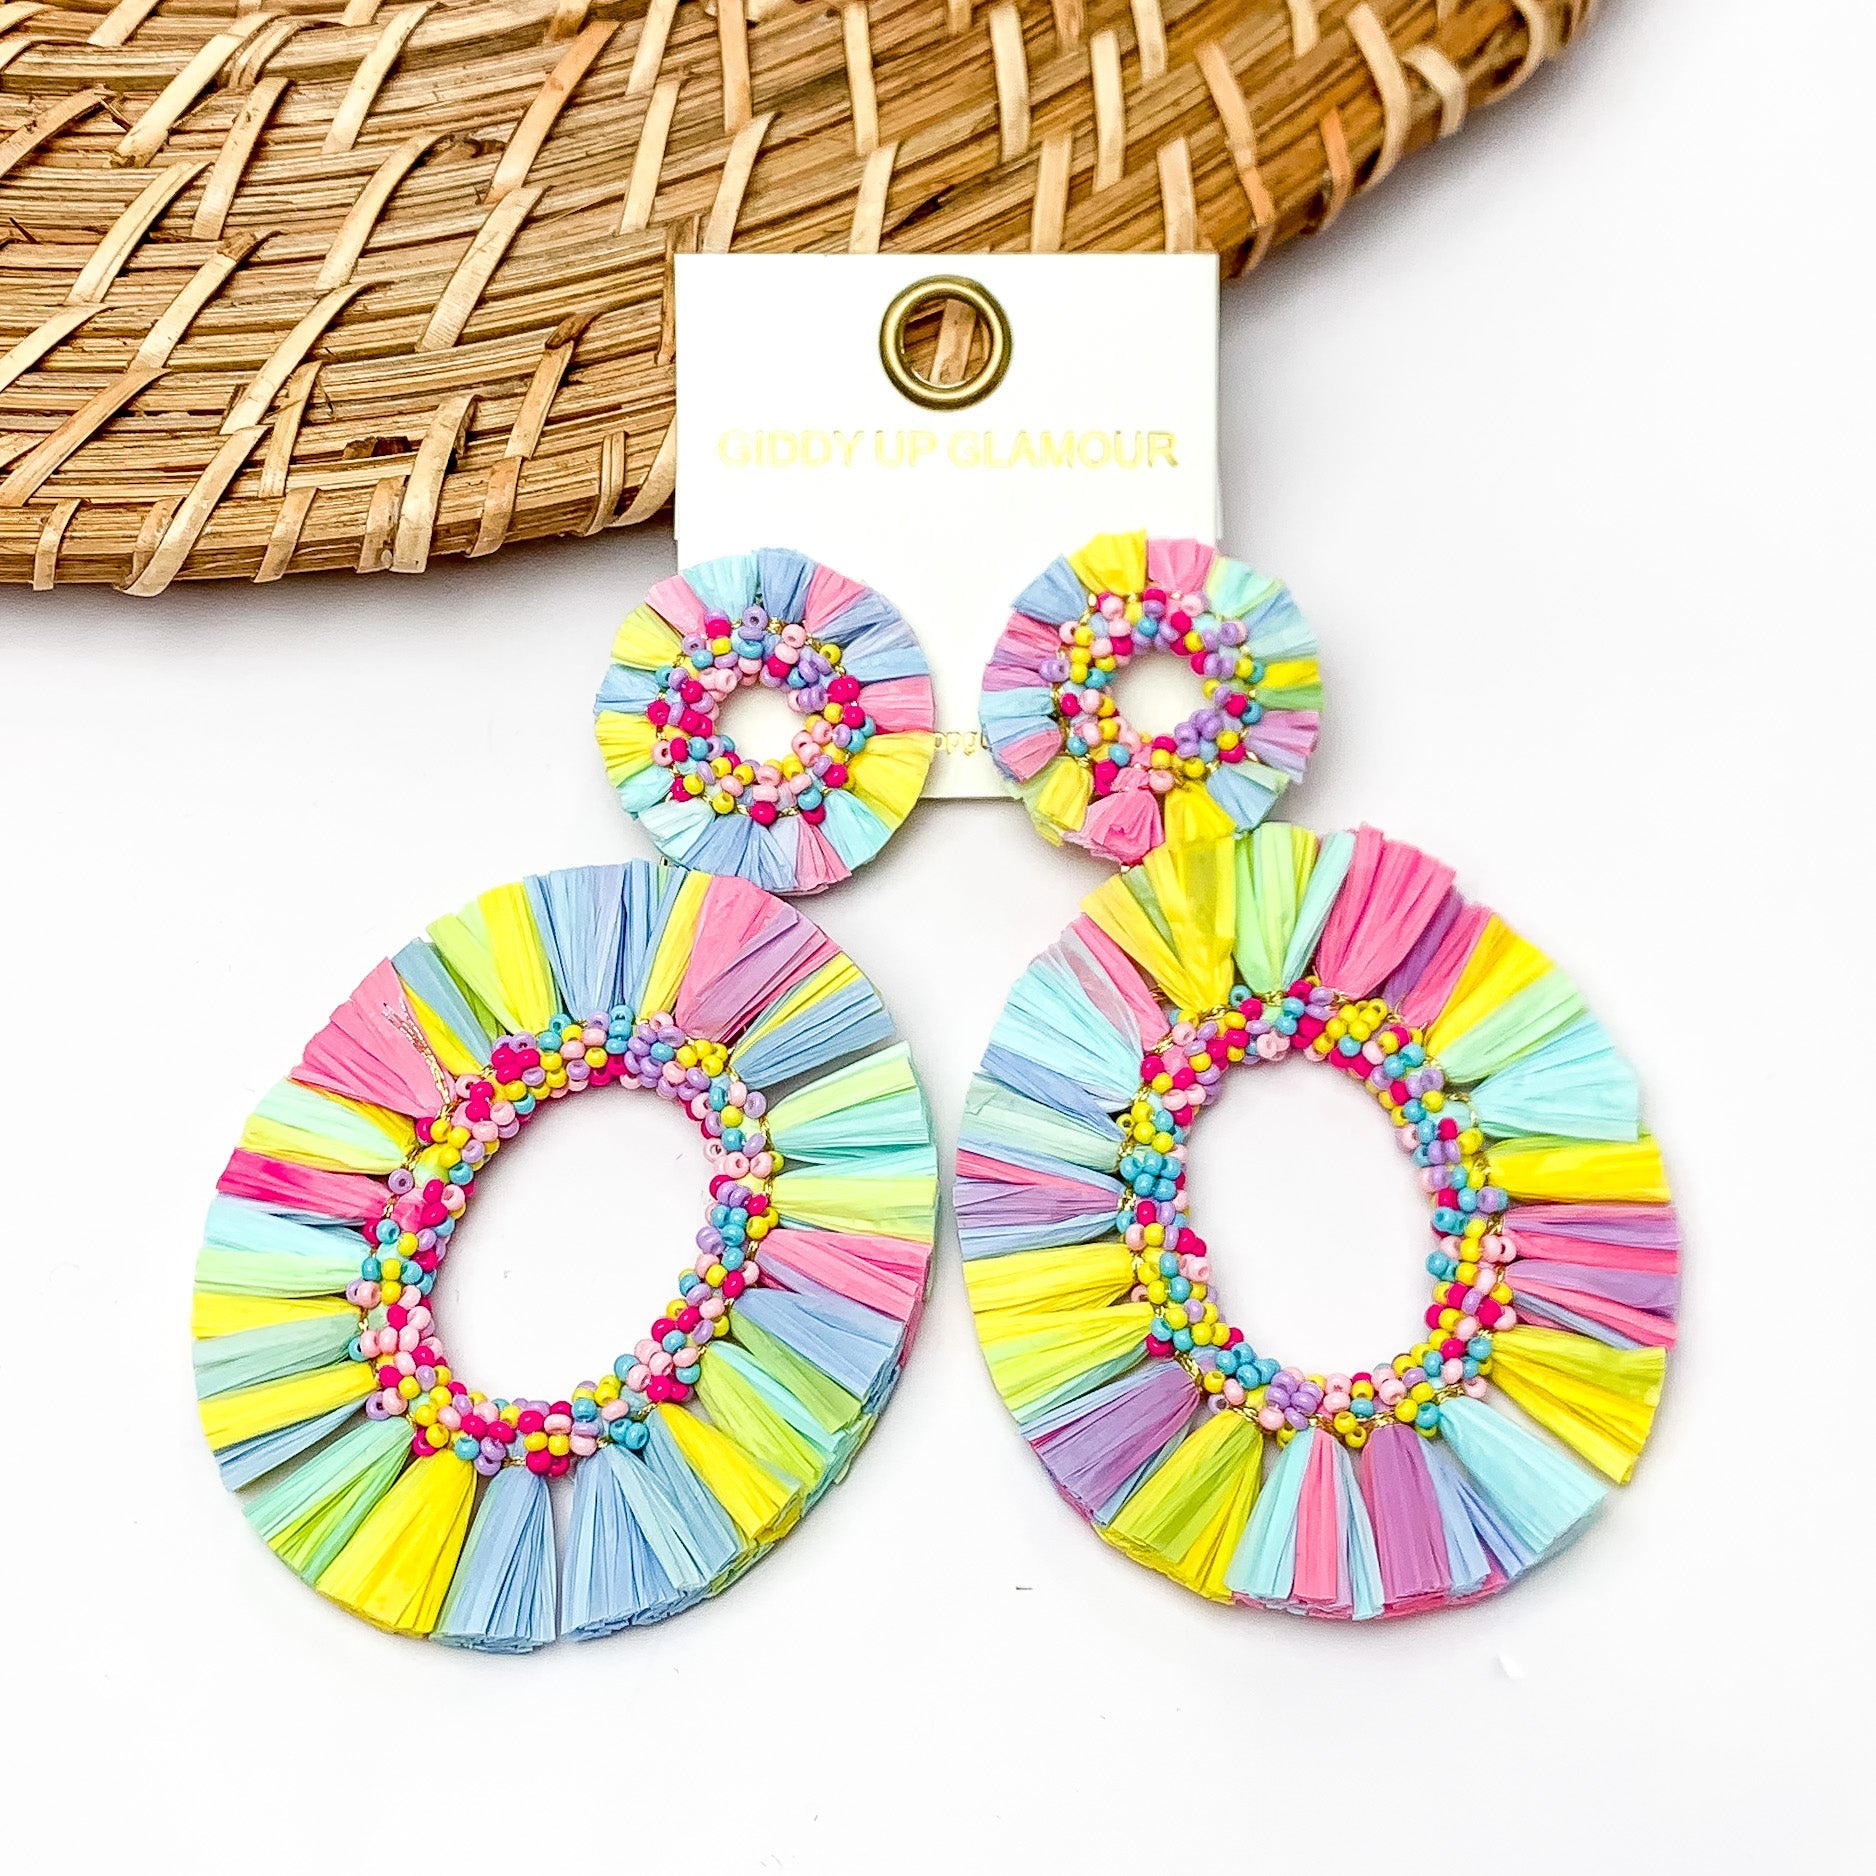 Siesta Keys Raffia Wrapped Open Oval Earrings in Multicolor. Pictured on a white background with a wood like piece in the top left.